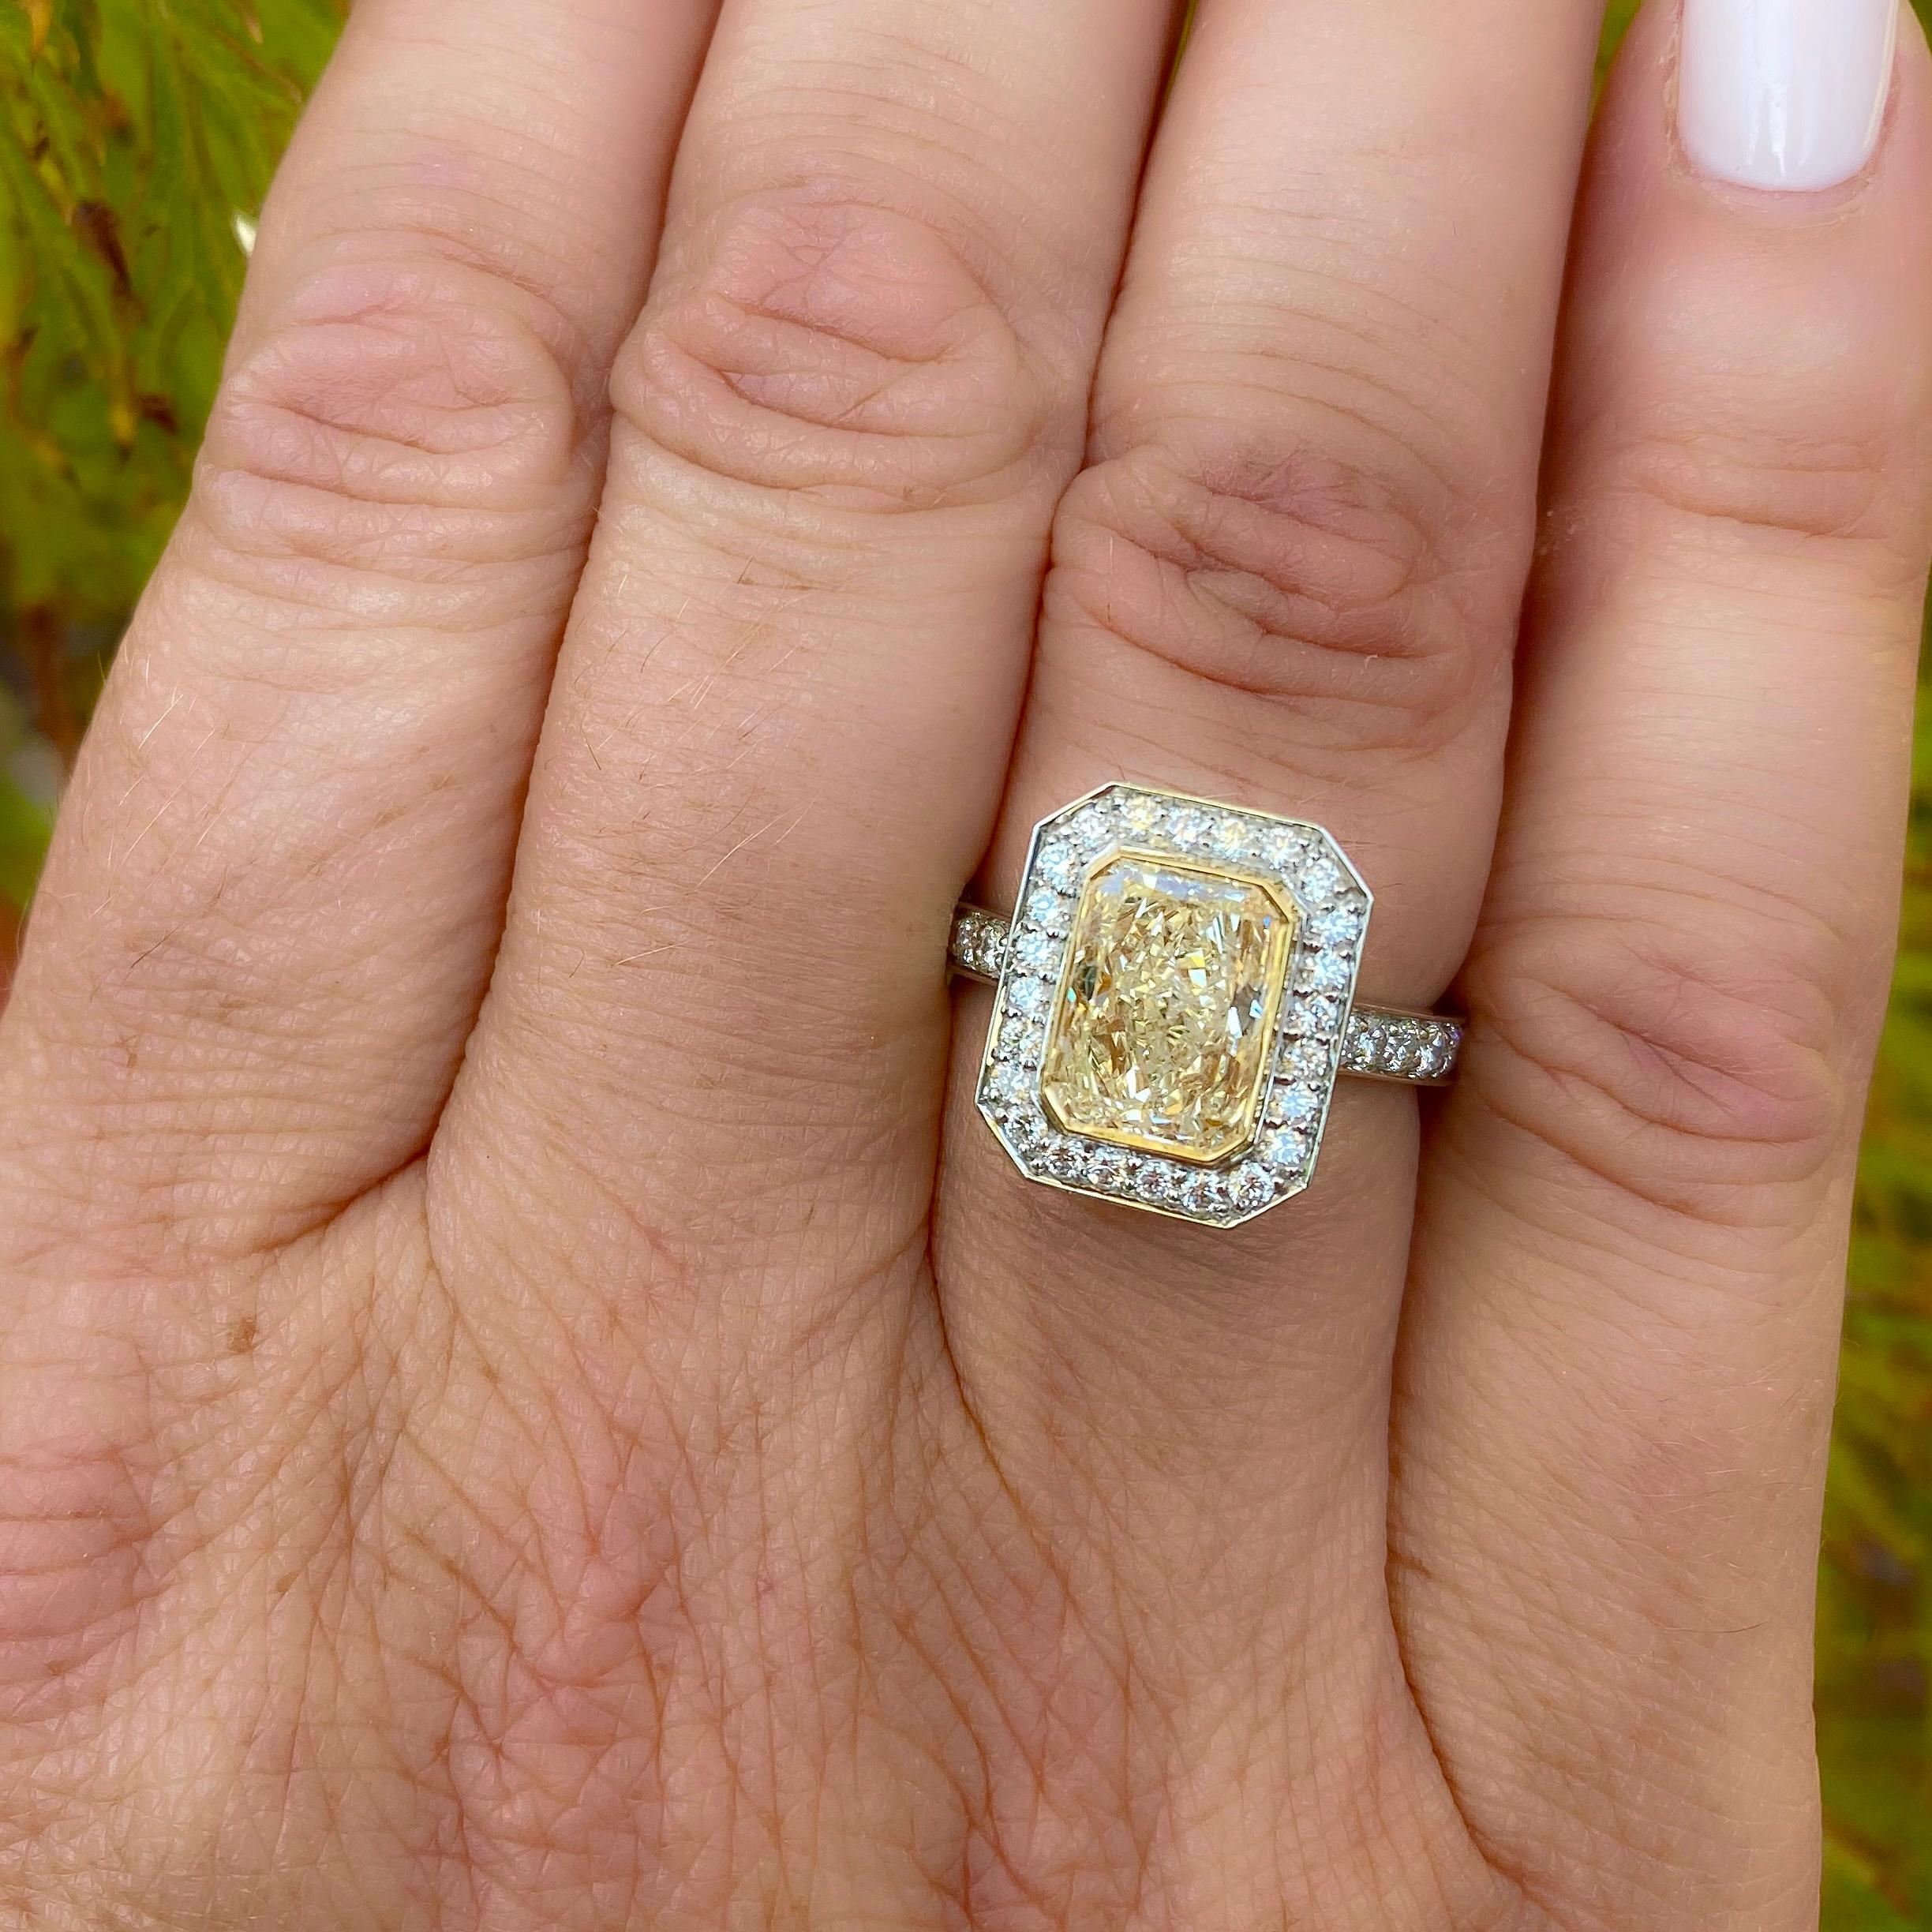 Elegant and classic, this platinum ring centers a 2.21 carat radiant-cut natural yellow diamond bezel-set in 18k yellow gold for added beauty, surrounded by 42 near colorless round brilliant-cut diamonds, for a total weight of 2.81 carats. The ring